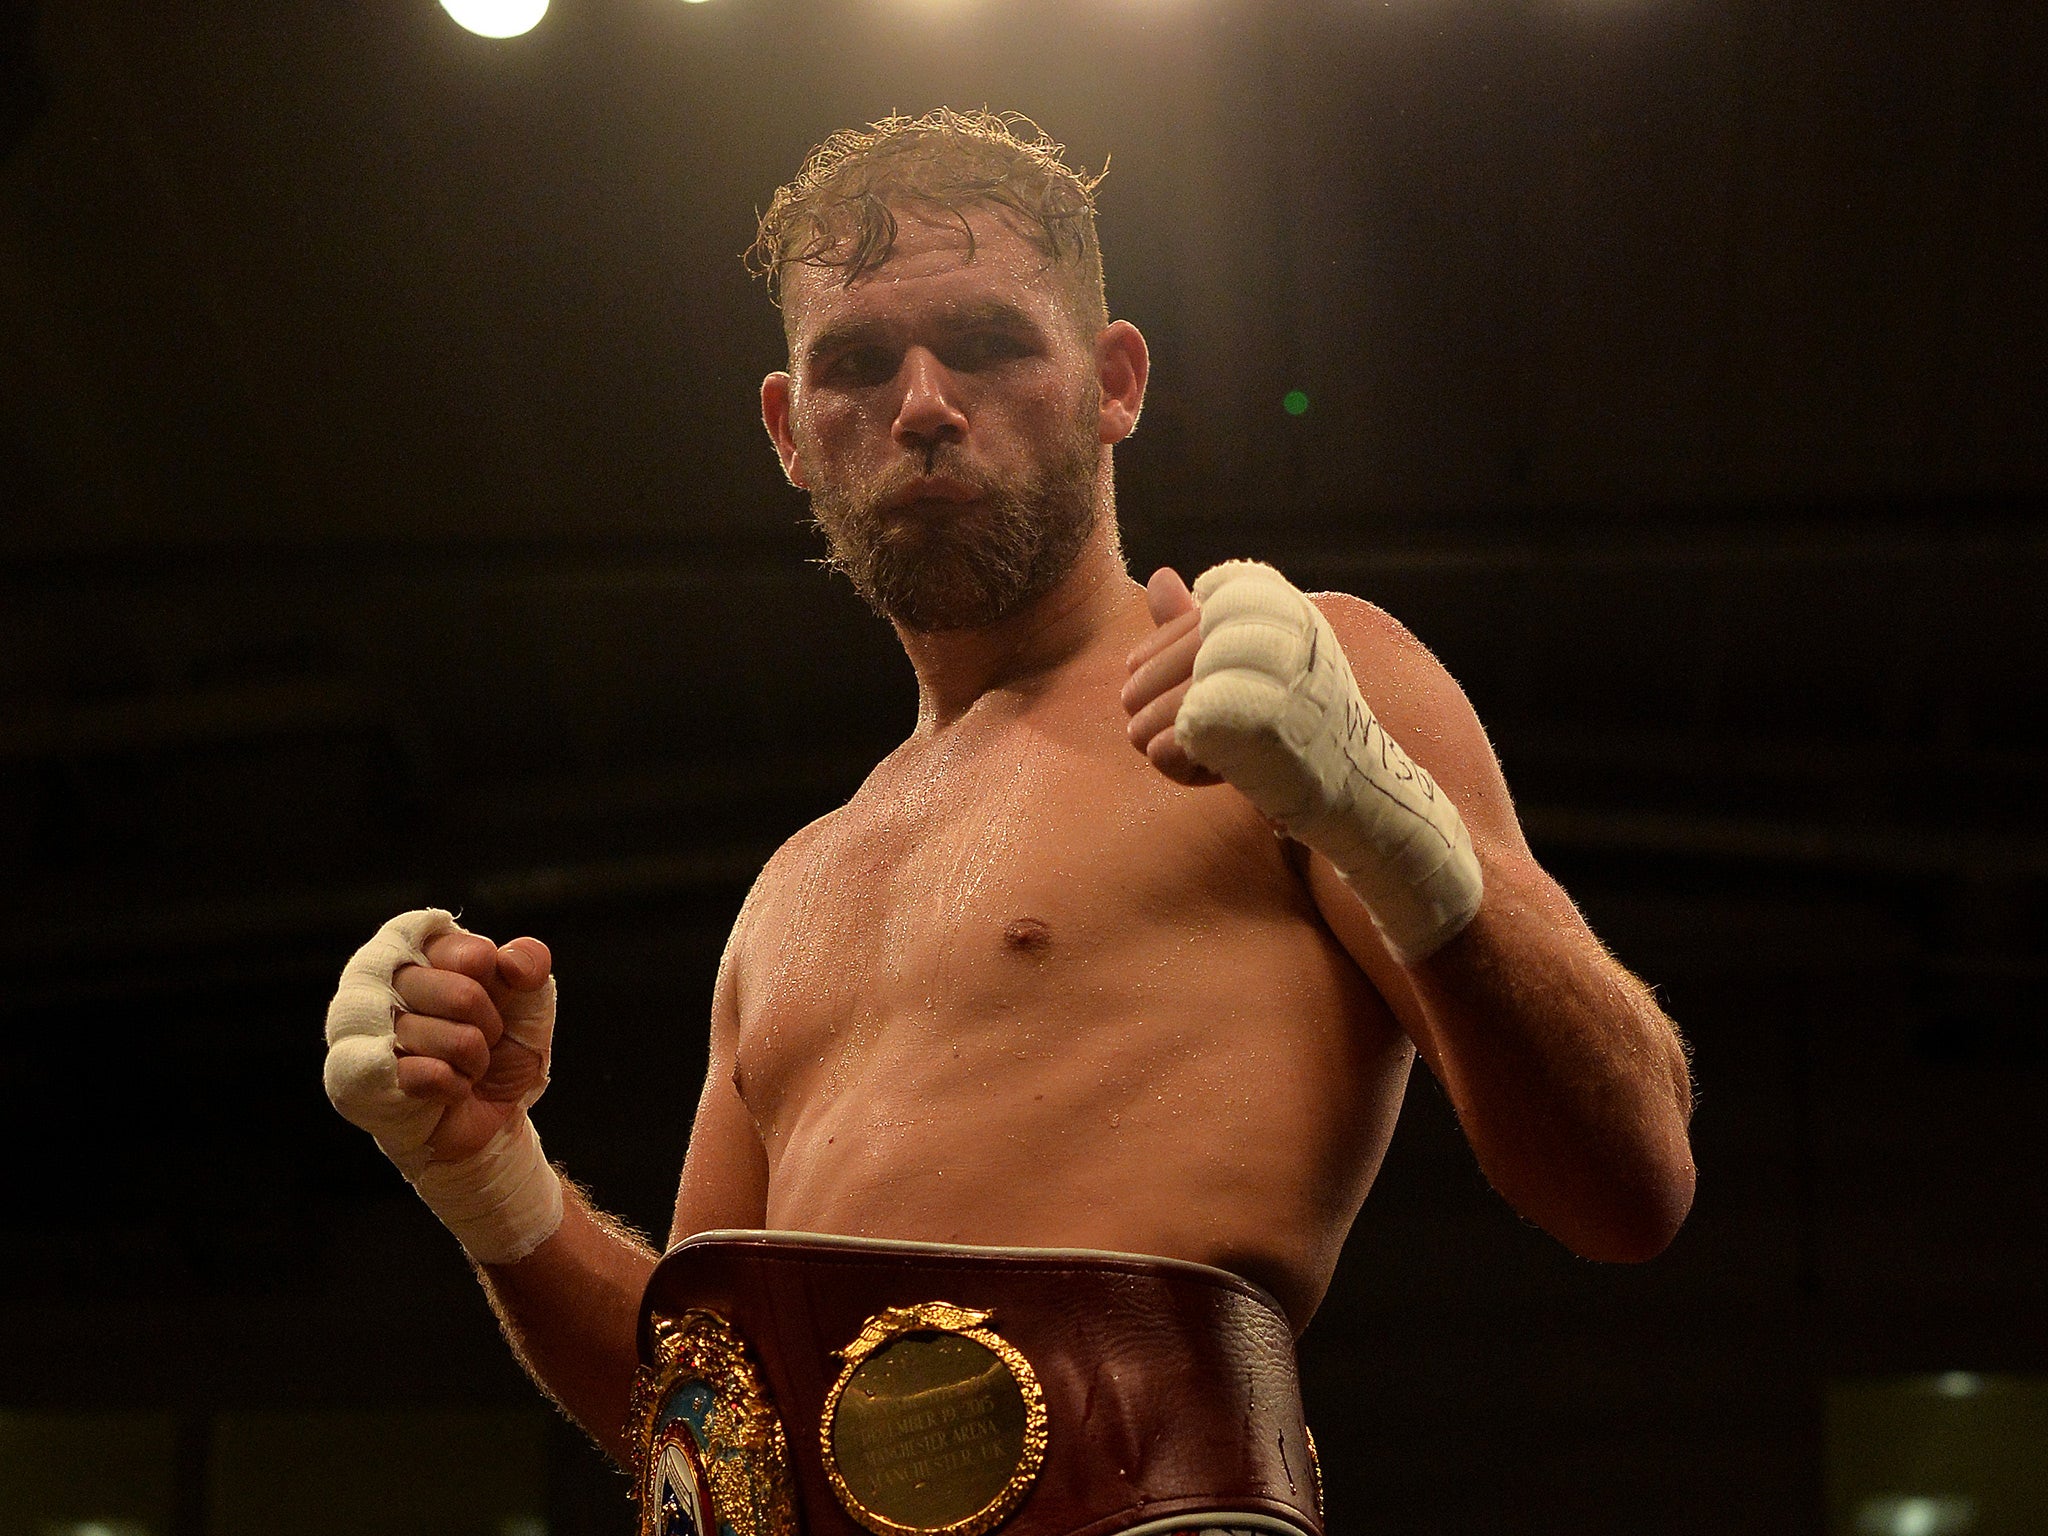 Billy Joe Saunders' team intend to retain the July 8 date